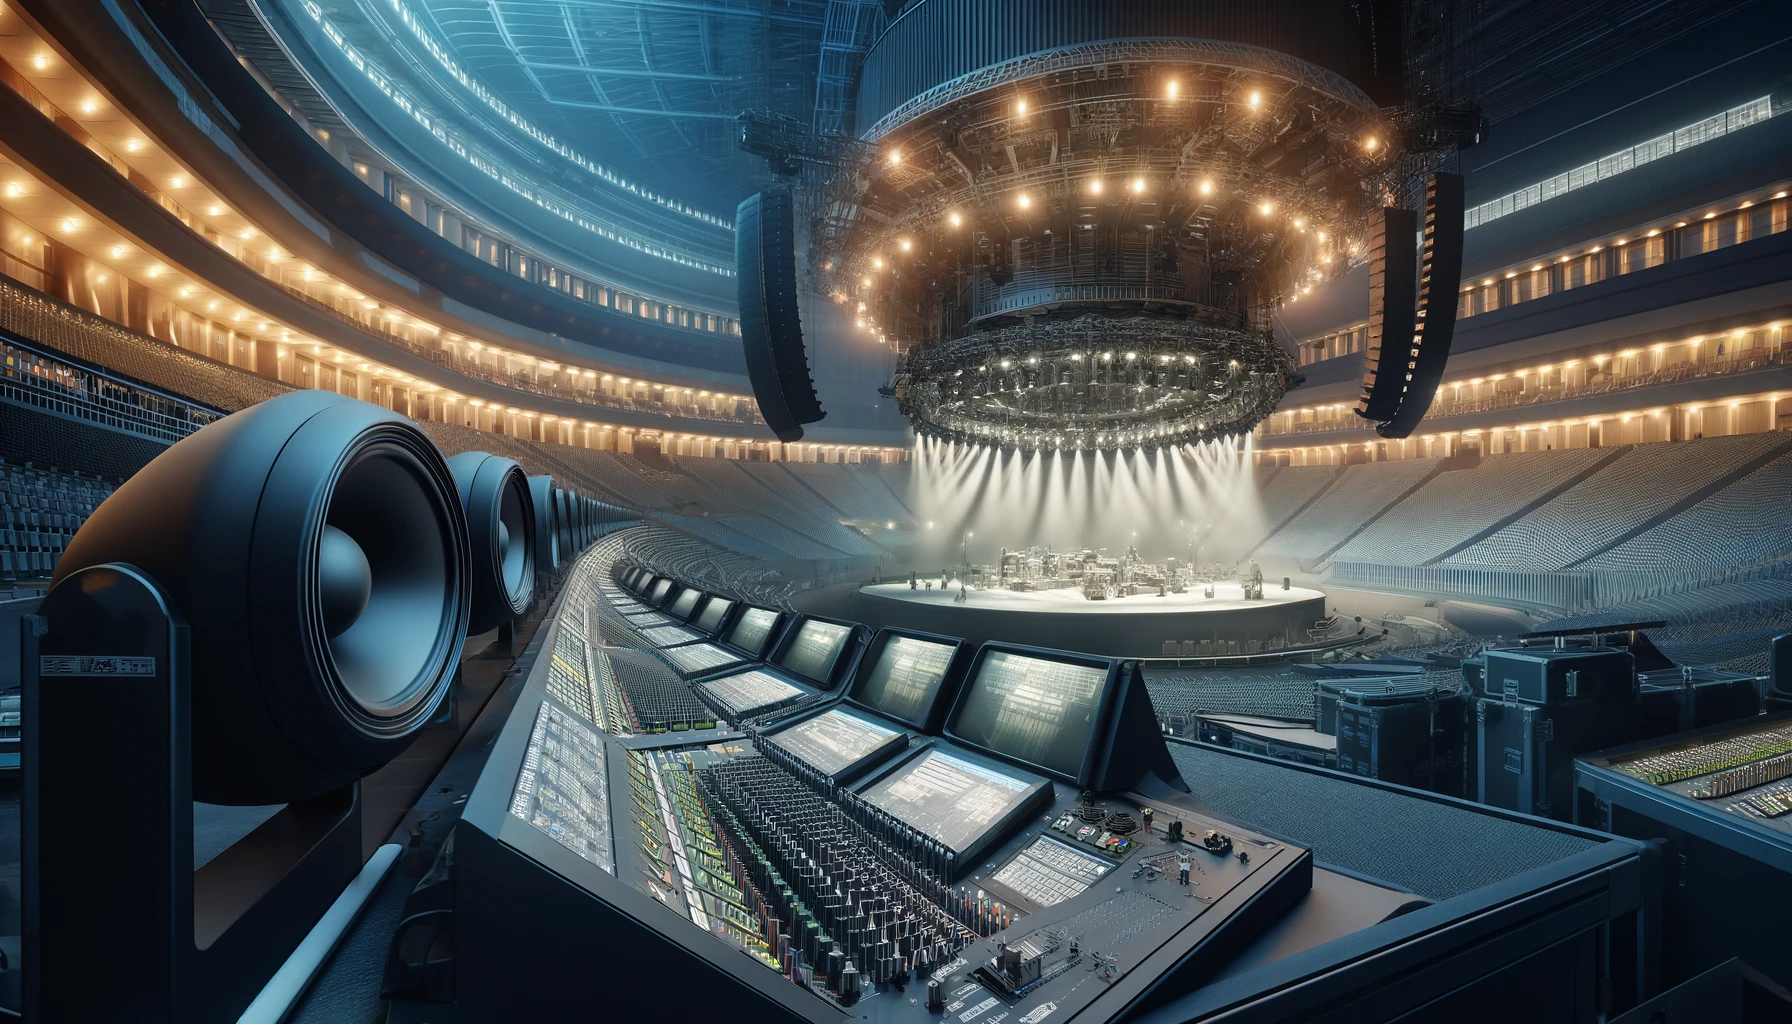 A detailed image showcasing the sophisticated live concert equipment at the Budokan arena in Tokyo, Japan. The focus is on the advanced sound and lighting systems, including large speakers, intricate lighting rigs, and state-of-the-art mixing consoles. The arena's unique acoustic design is highlighted, showing how it enhances the sound quality for performances. The background captures the iconic circular structure of the Budokan, filled with technical equipment and a few technicians adjusting the settings. This scene illustrates the technological excellence of the venue, depicted in a wide 16:9 format.